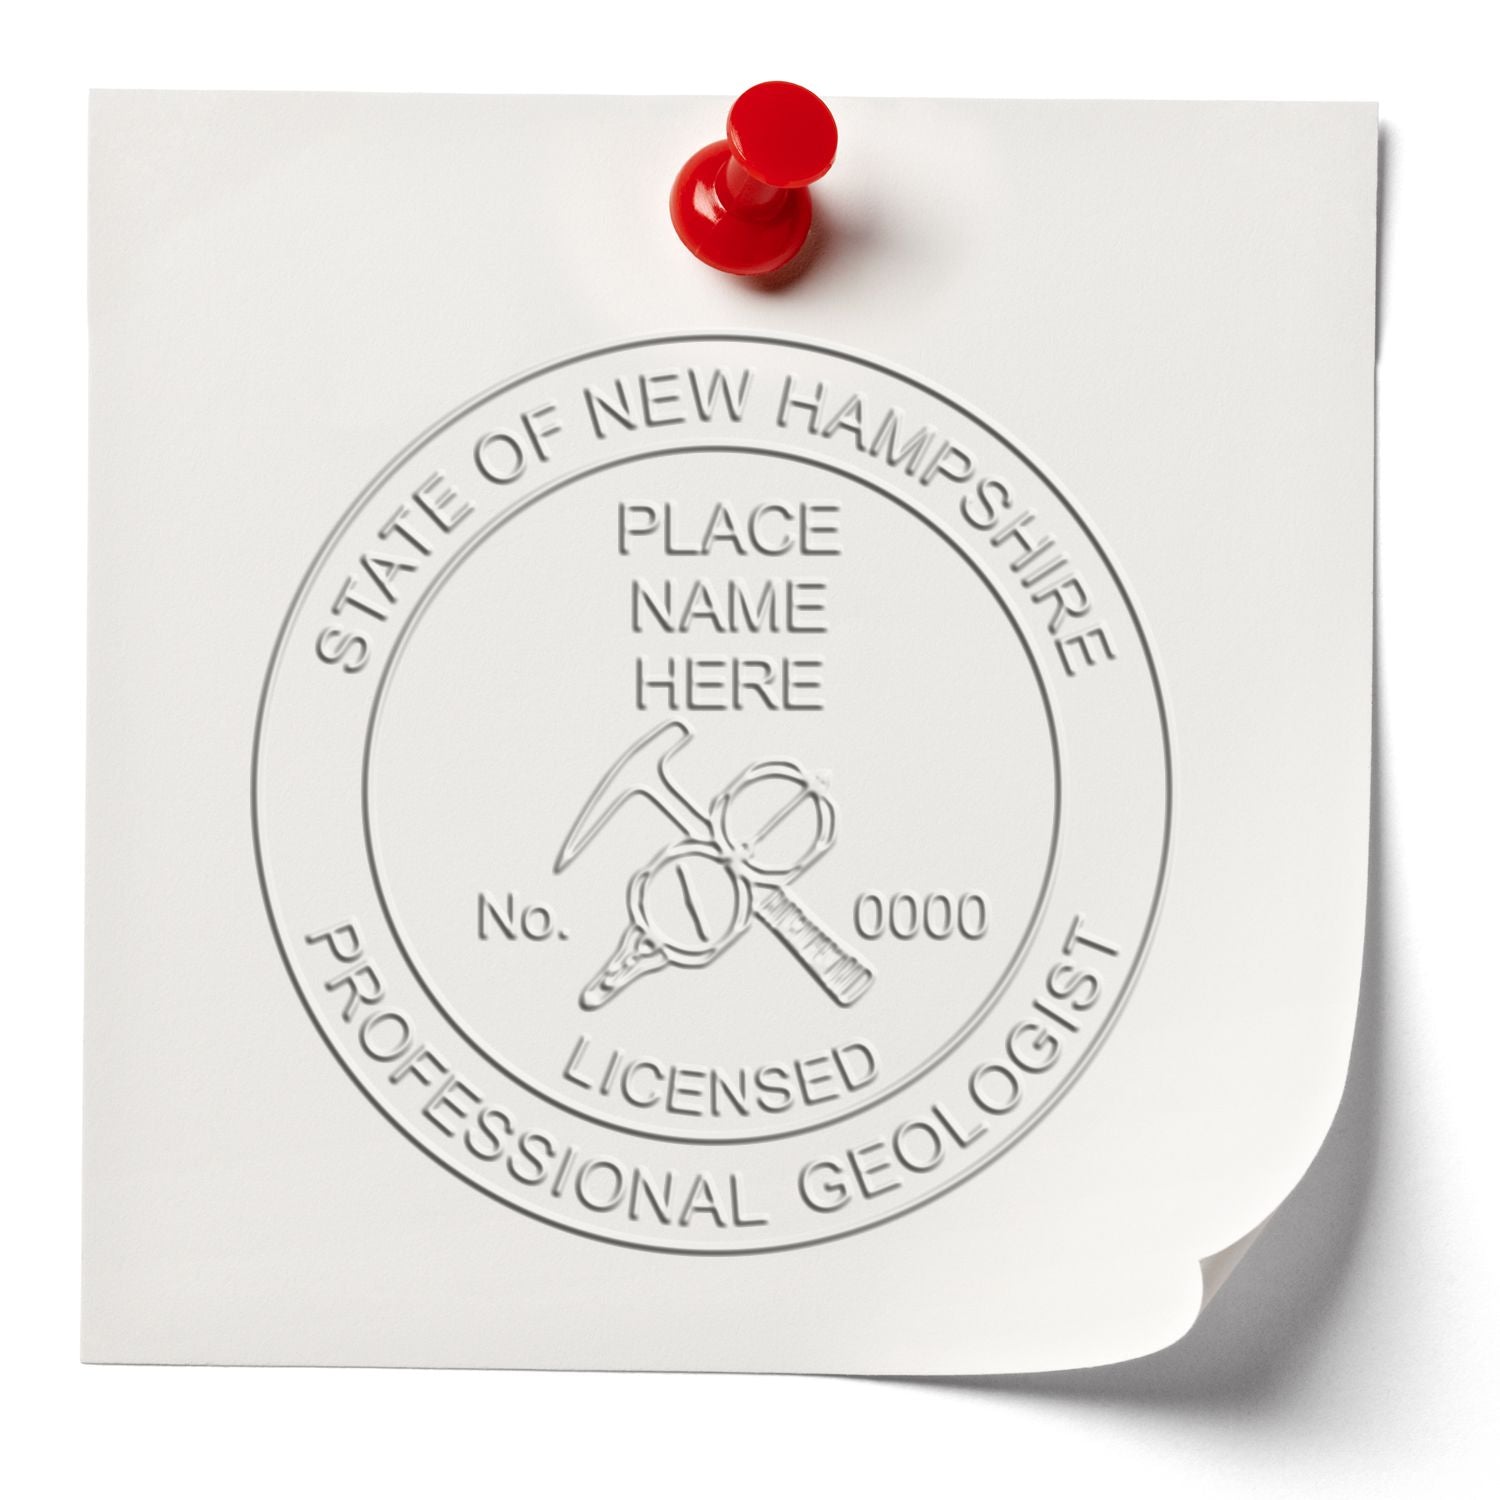 The main image for the Heavy Duty Cast Iron New Hampshire Geologist Seal Embosser depicting a sample of the imprint and imprint sample